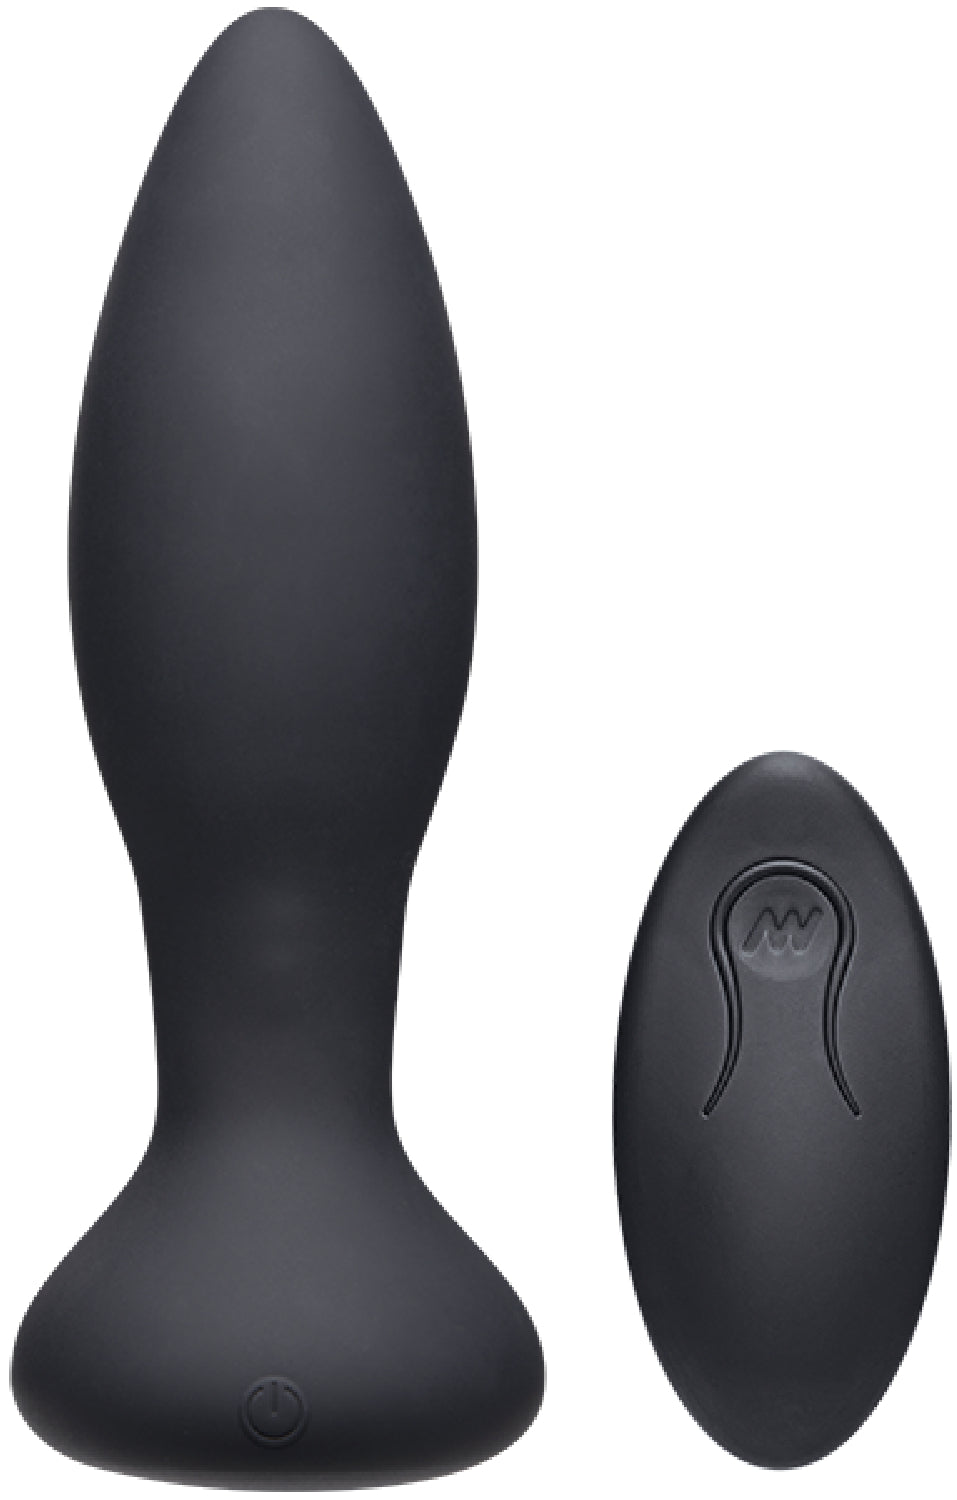 A-Play - Vibe - Experienced 5.75&quot; Anal Plug With Remote - Black